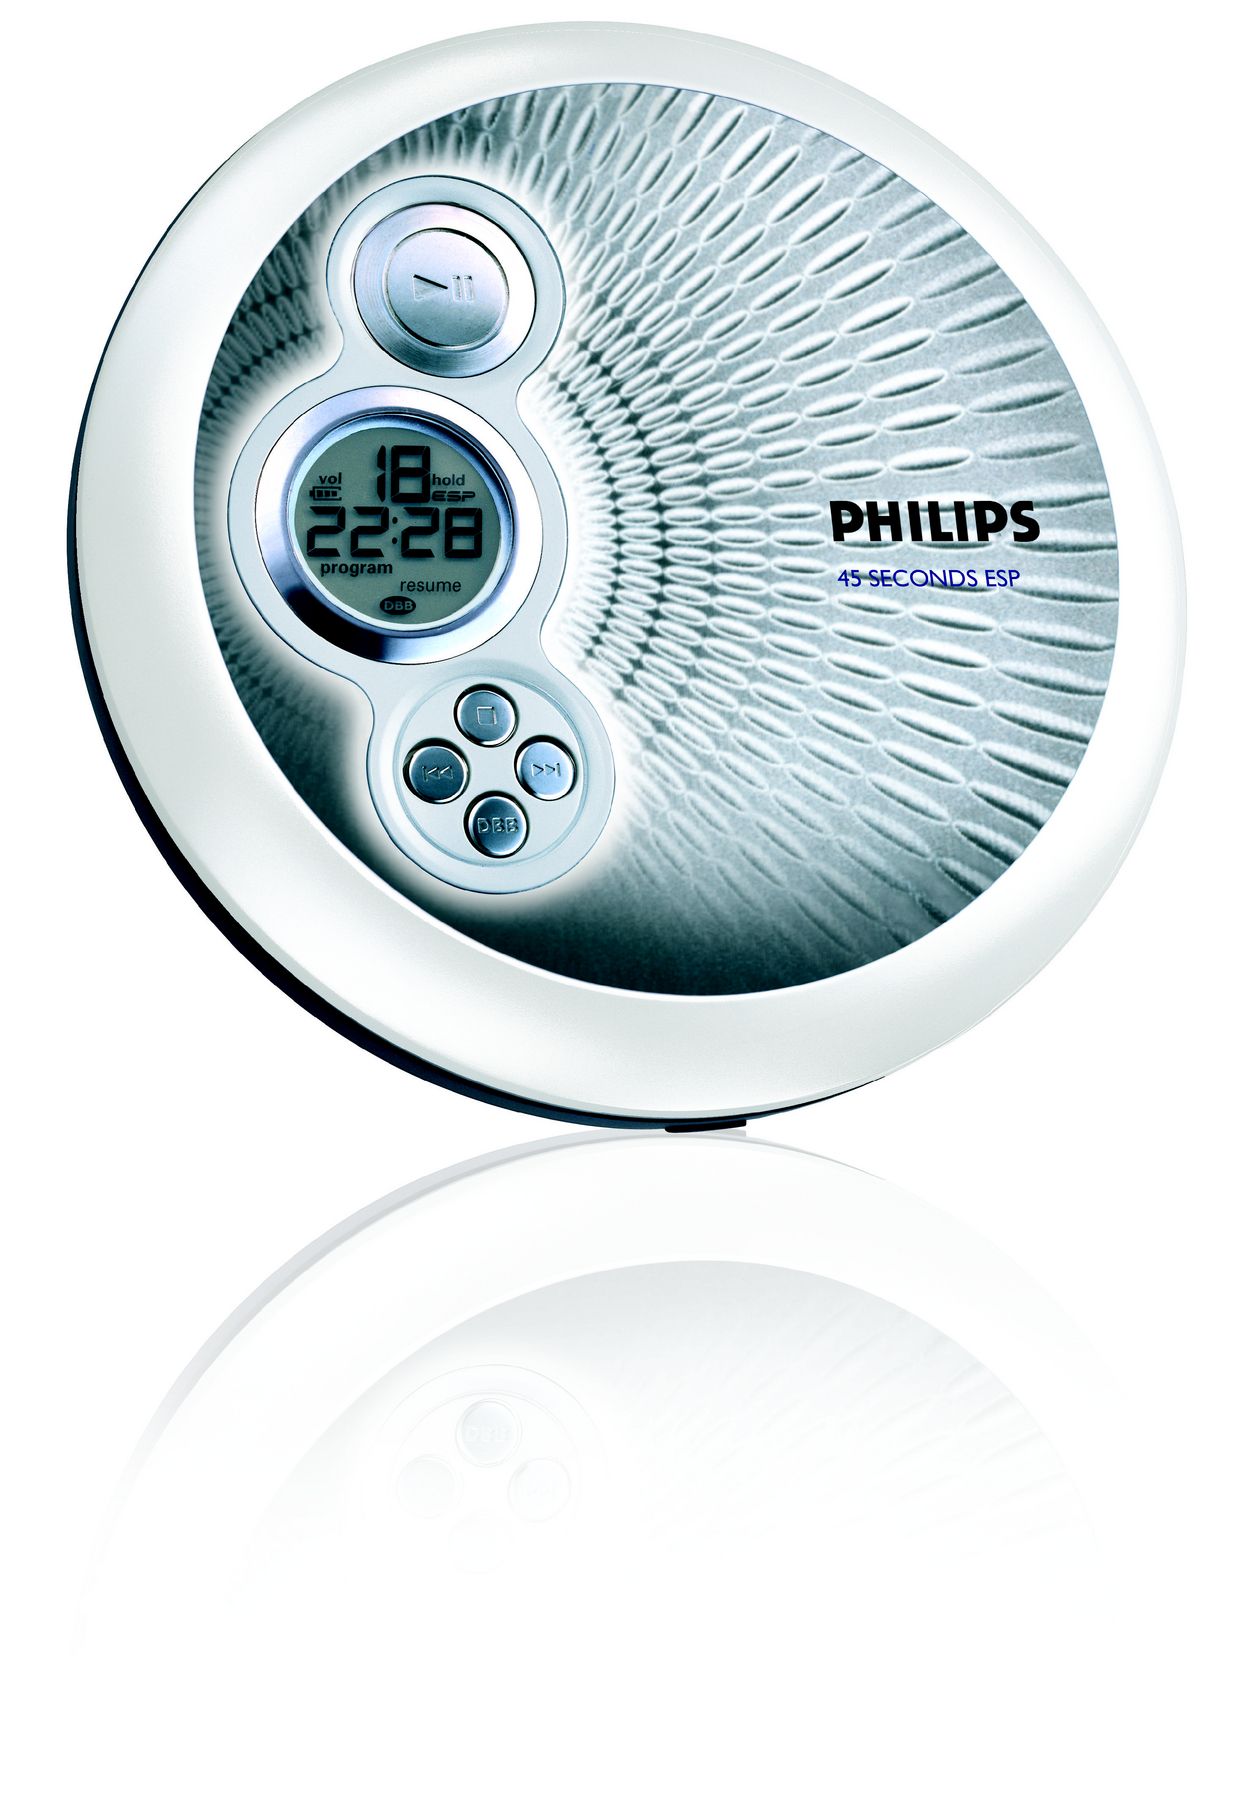 Productief Vrouw Huisje Portable CD Player AX2411/17 | Philips